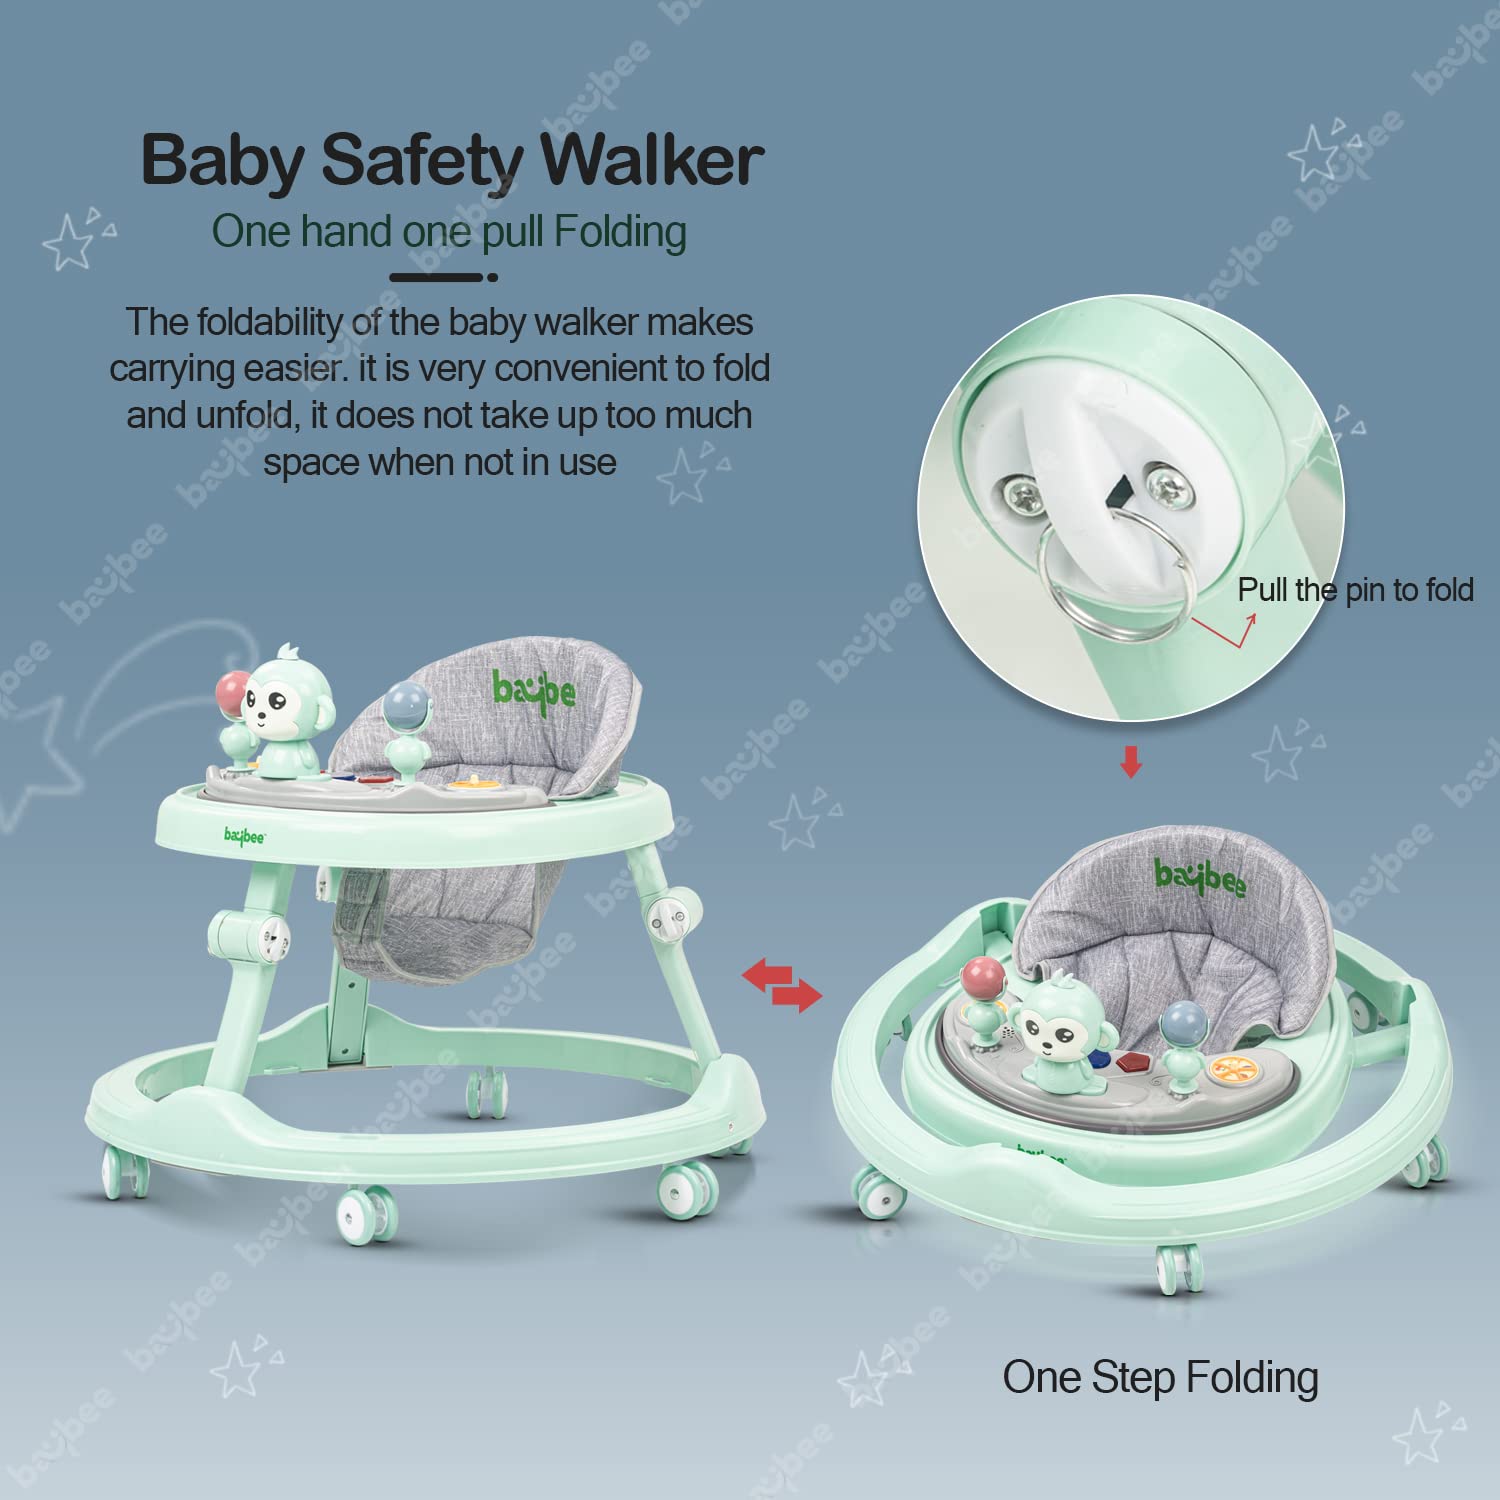 Baybee Drono Baby Walker for Kids, Round Kids Walker with 4 Seat Height Adjustable | Activity Walker for Baby with with Food Tray & Musical Toy Bar | Walker for Baby 6-18 Months Boys Girls (Green)